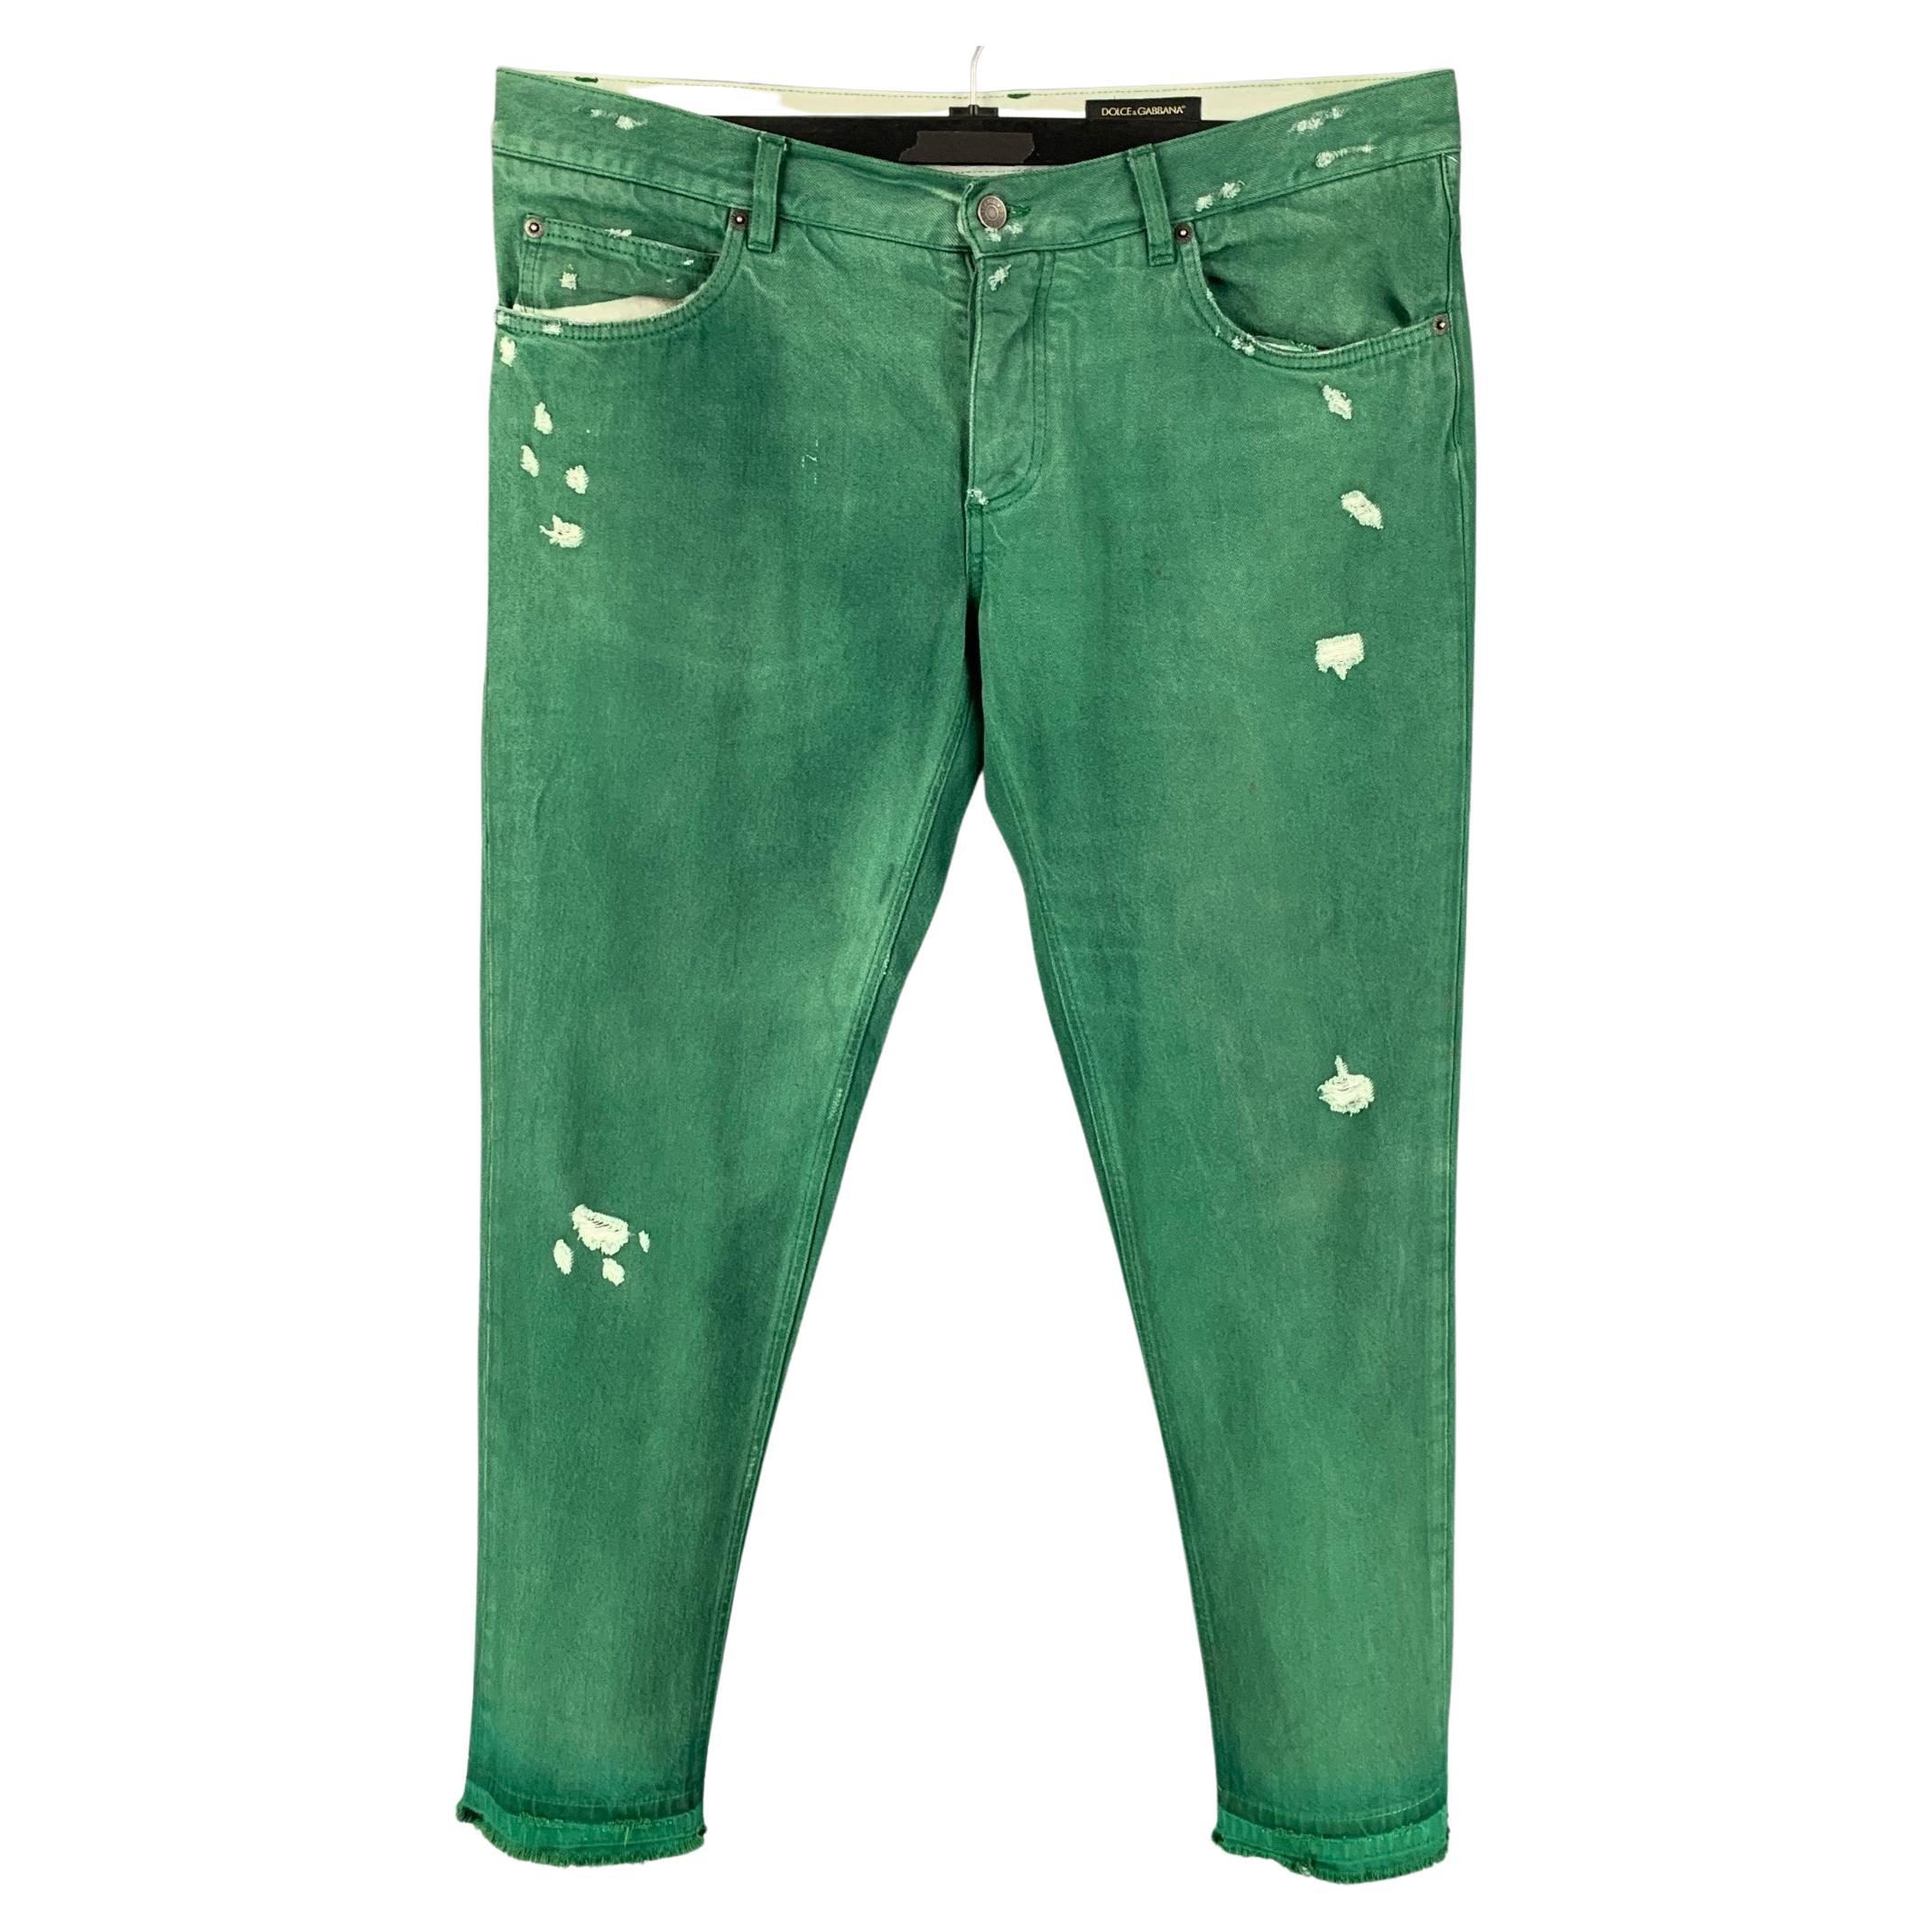 DOLCE & GABBANA Classic Size 36 Green Distressed Cotton Button Fly Jeans